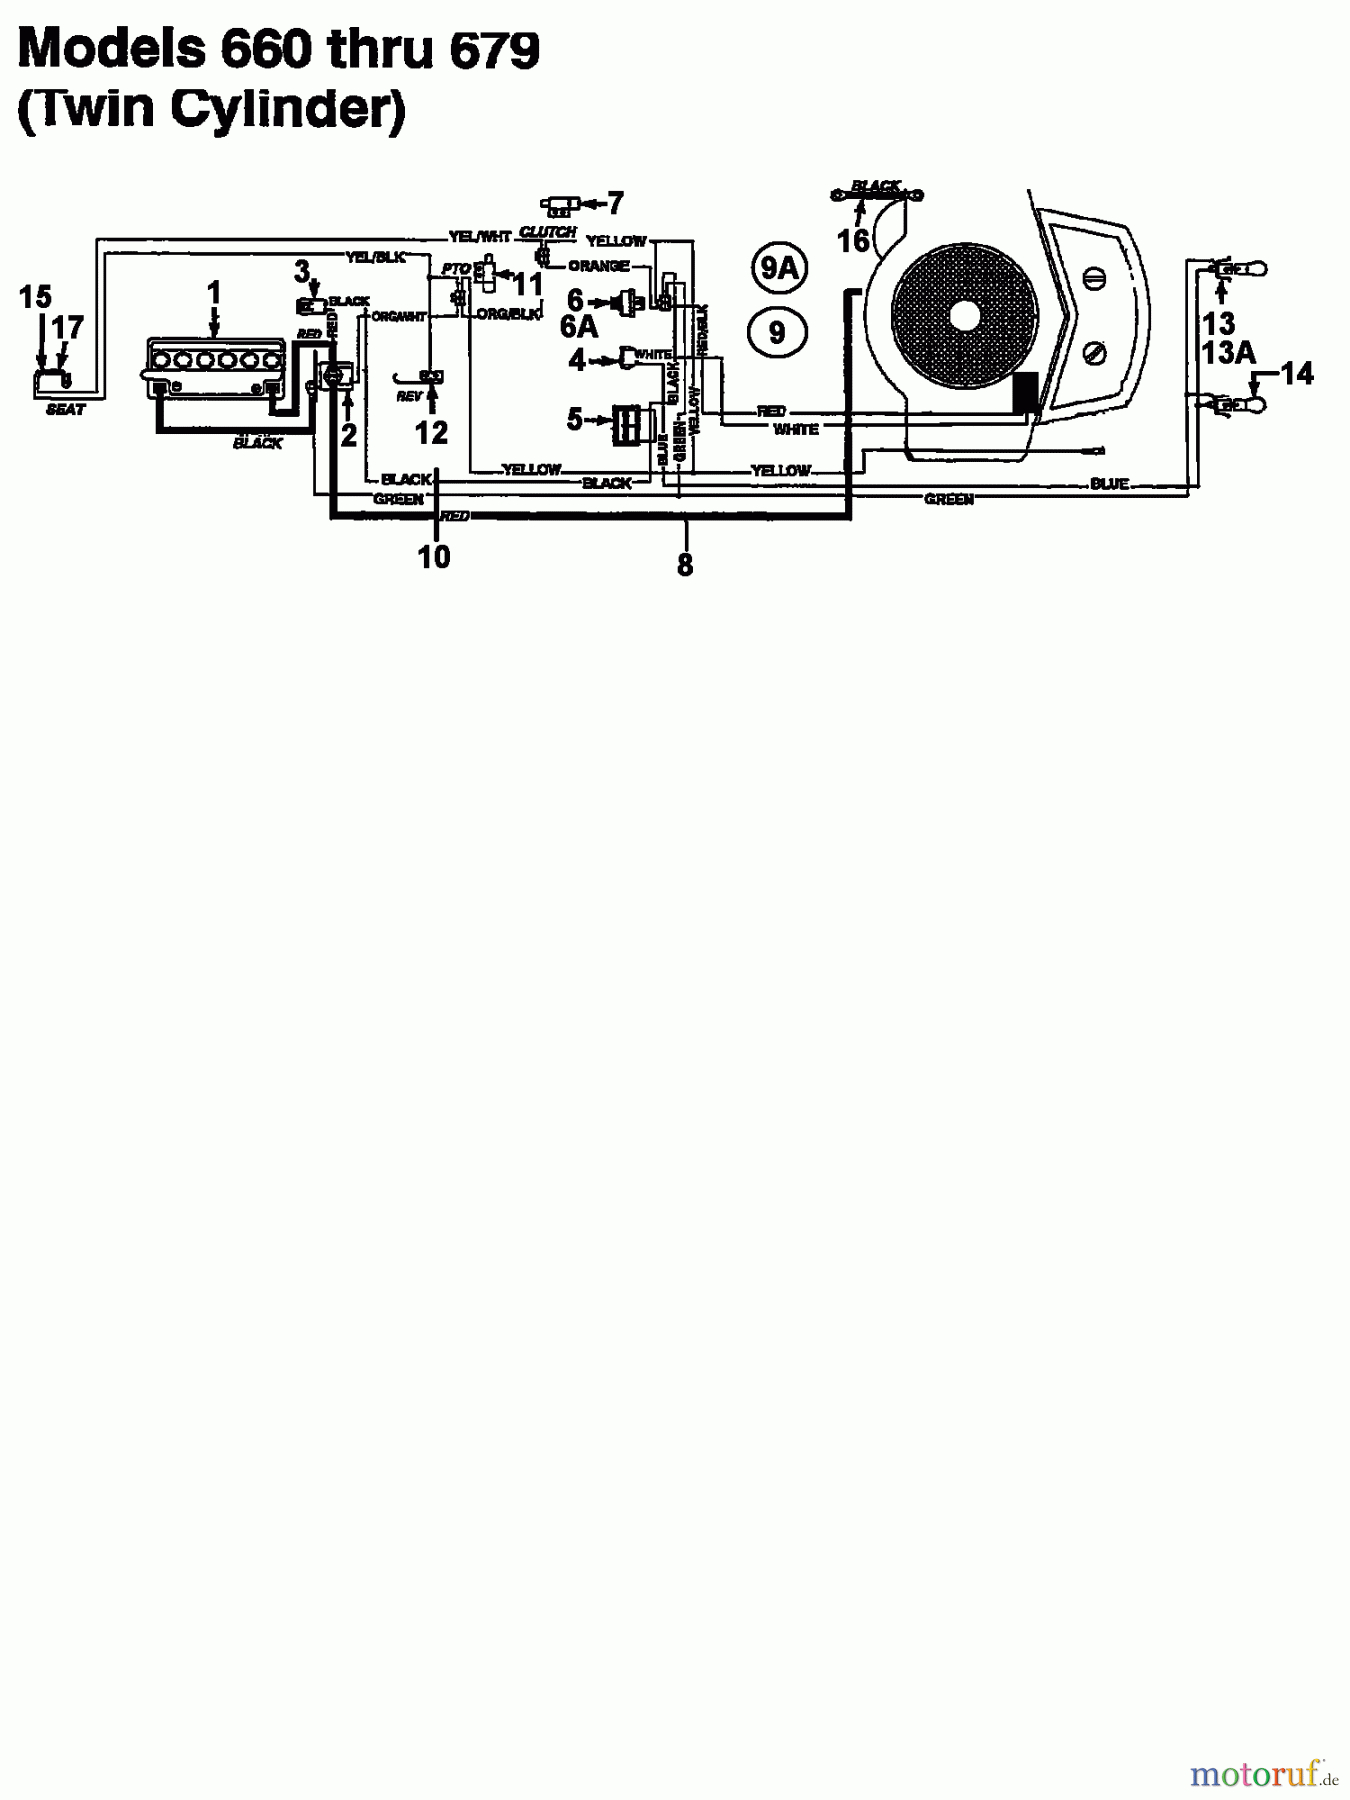  Florica Lawn tractors 12/76 HN 133I679C638  (1993) Wiring diagram twin cylinder